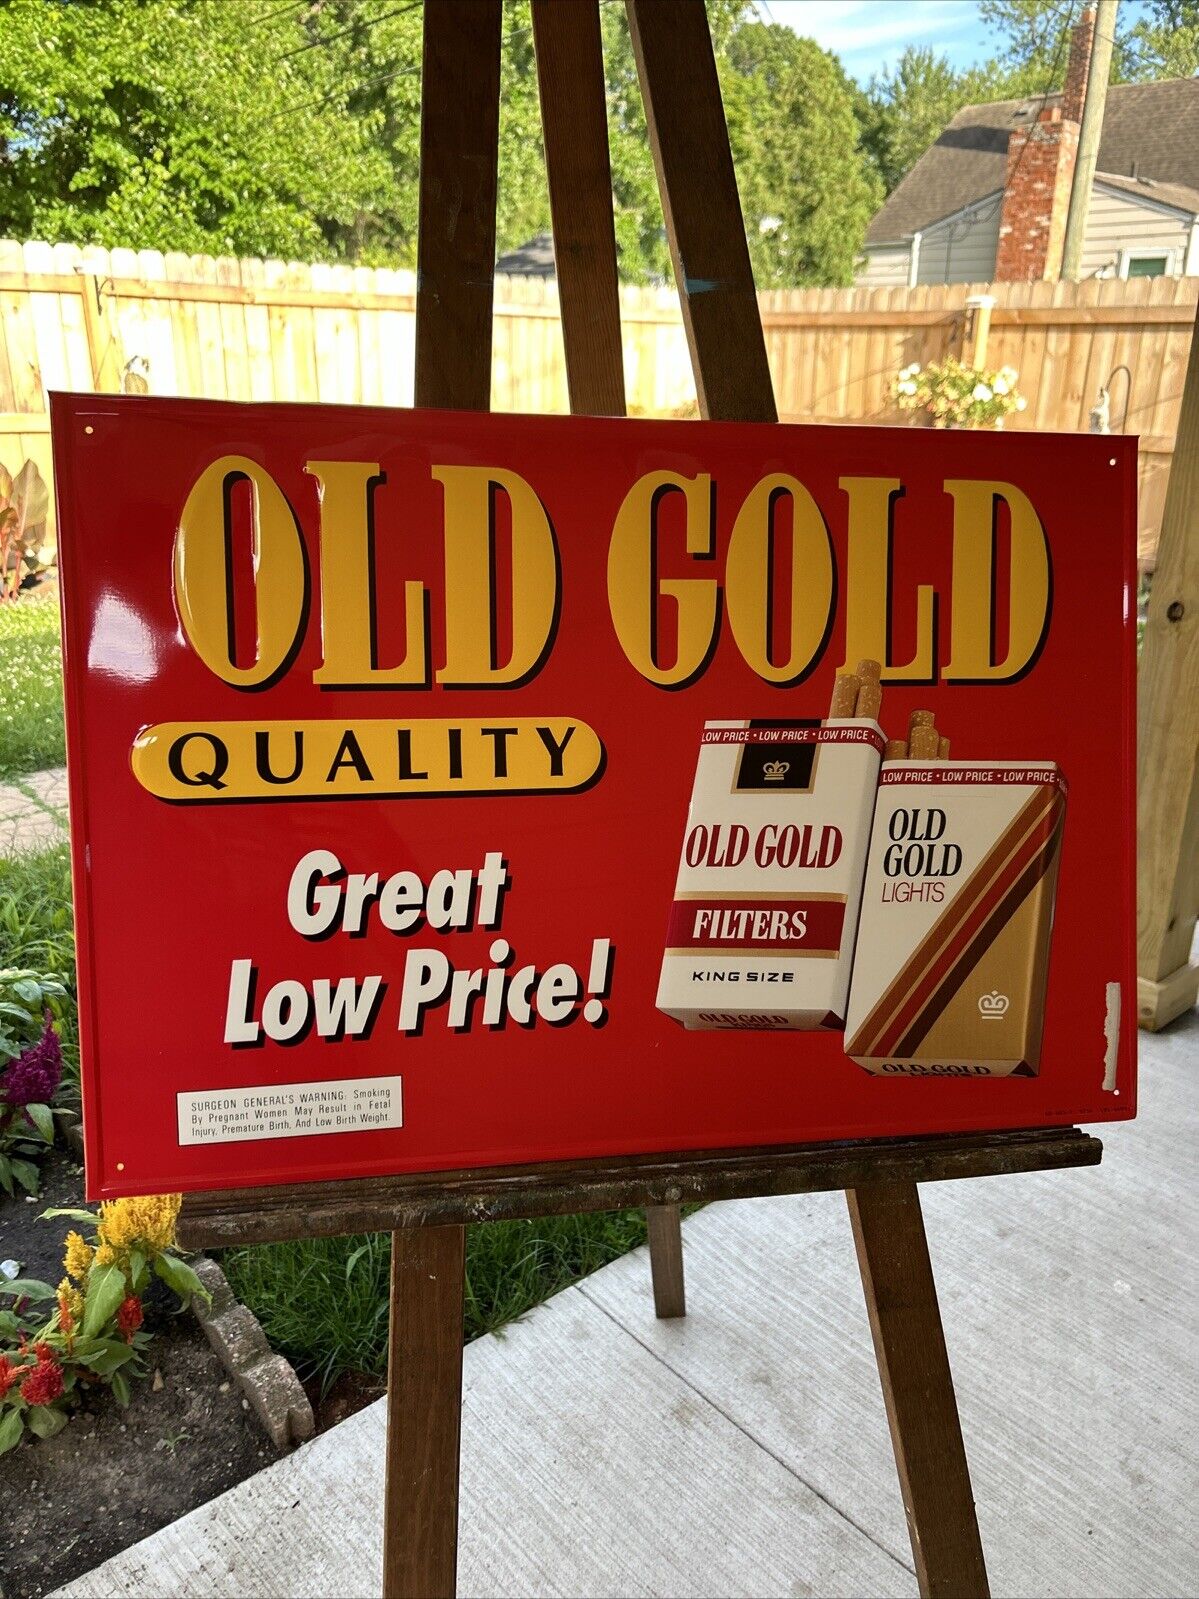 VTG OLD GOLD Quality Cigarettes Embossed Sign Approx 25.5”x17.5” Mancave